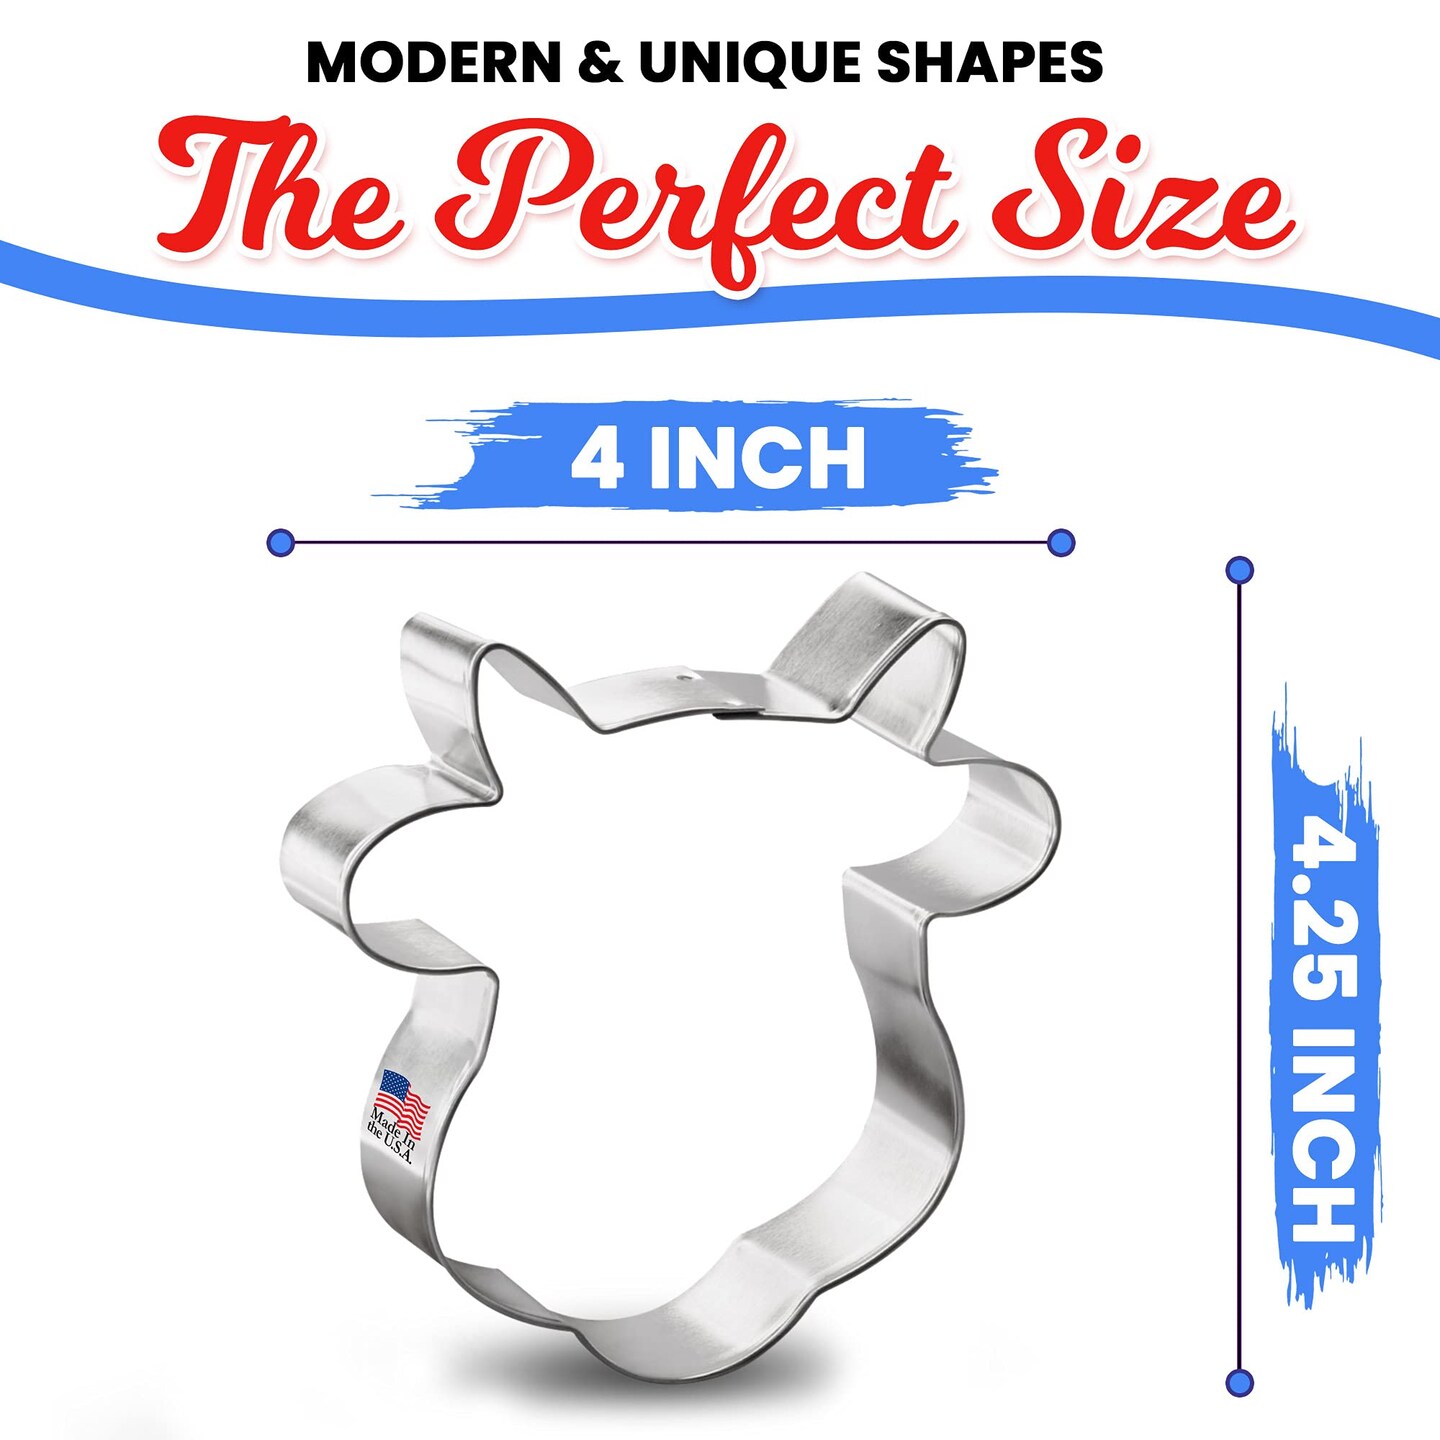 Cow Face Cookie Cutter 4.25 in B1608, CookieCutter.com, Tin Plated Steel, Handmade in the USA